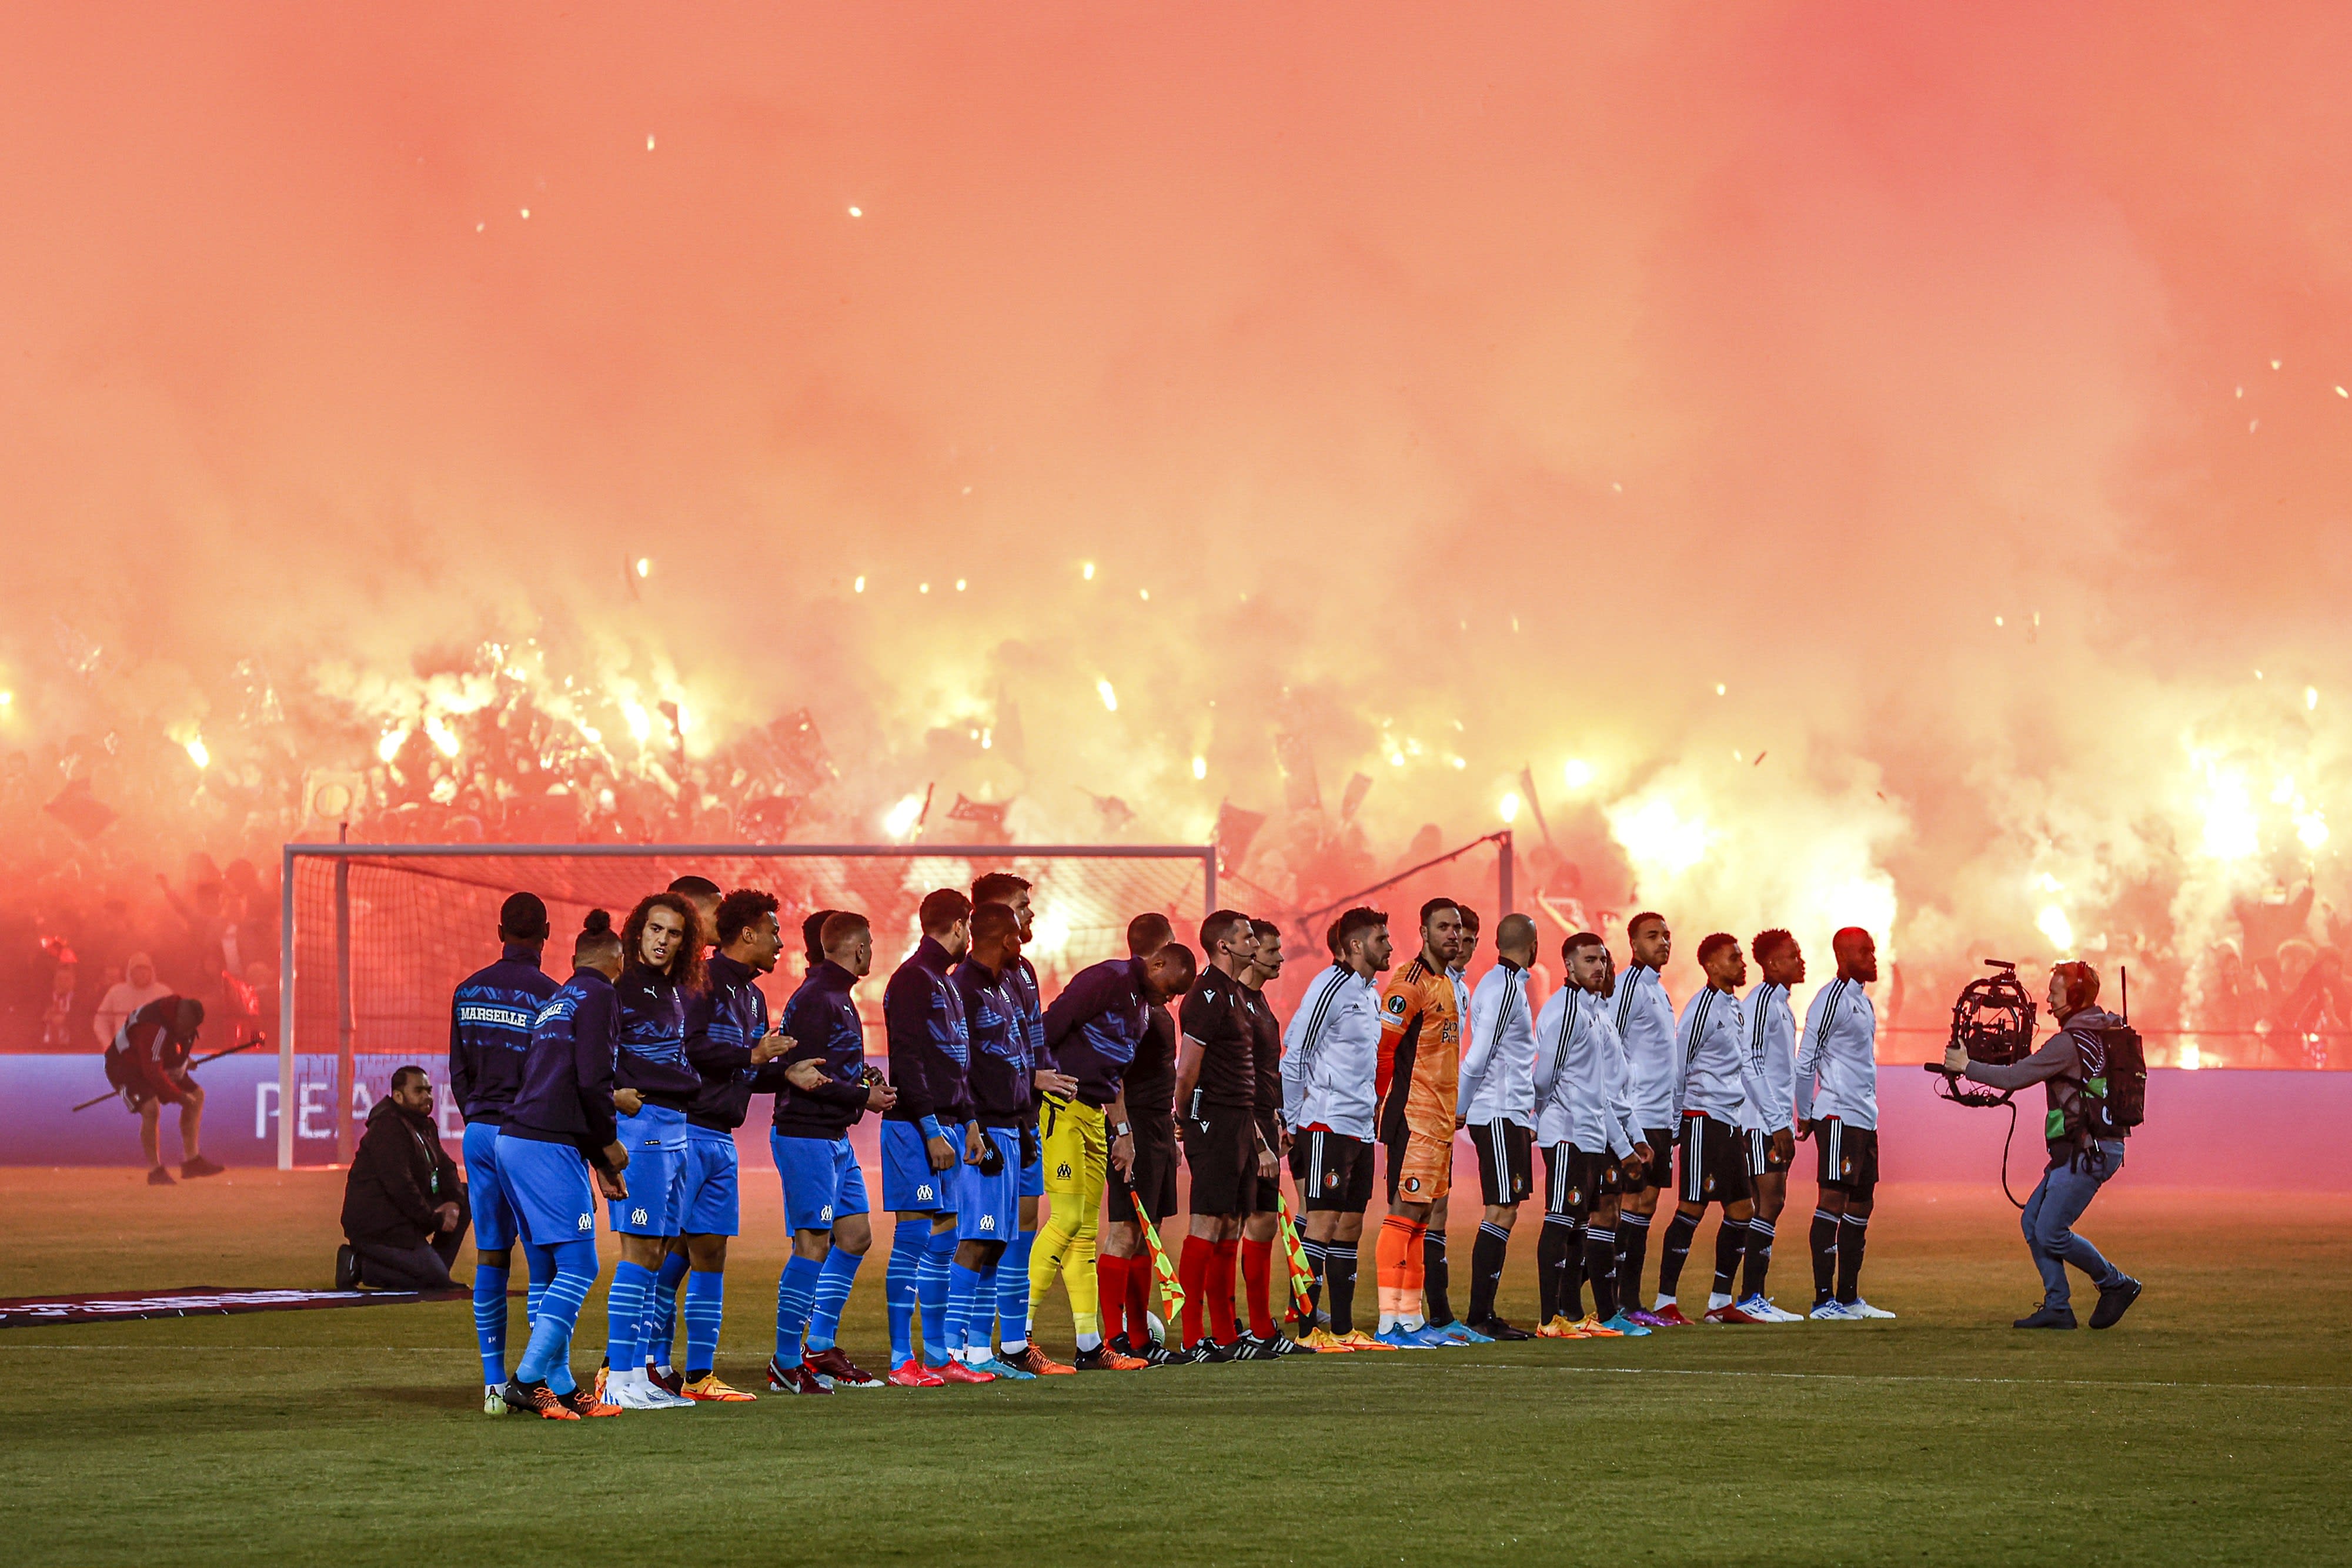 Flares in the stands, Feyenoord vs. Marseille